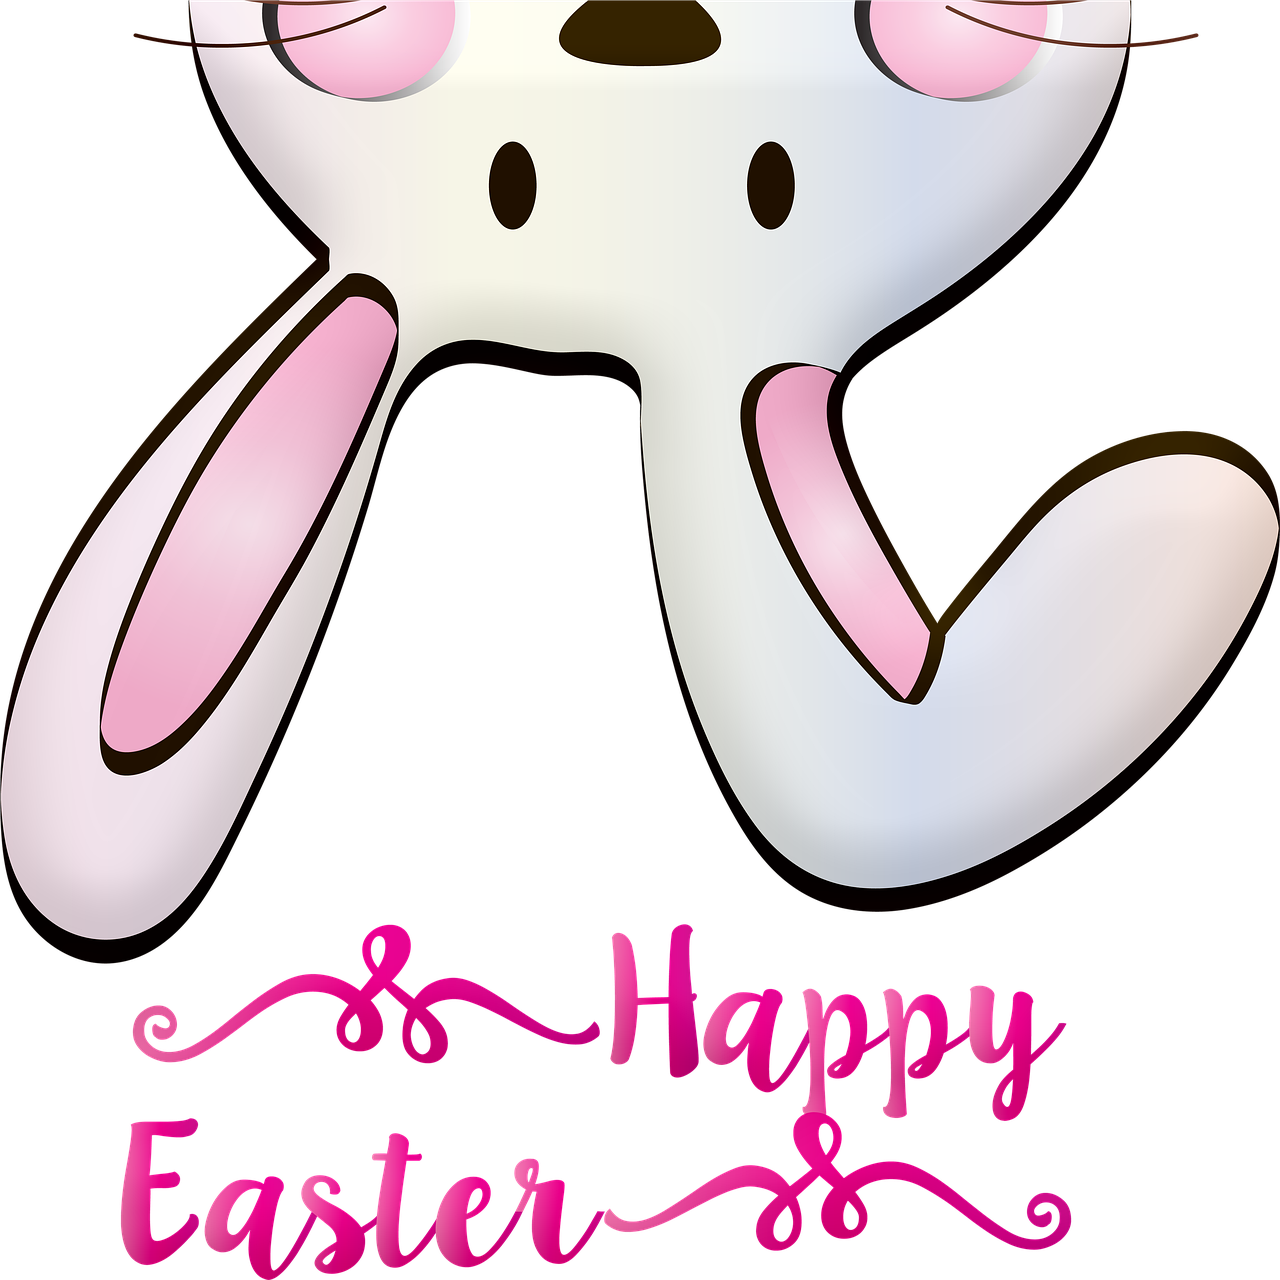 a close up of a bunny face on a black background, a digital rendering, by Elaine Hamilton, shutterstock, cute fumo plush bunny girl, with a happy expression, easter, background image